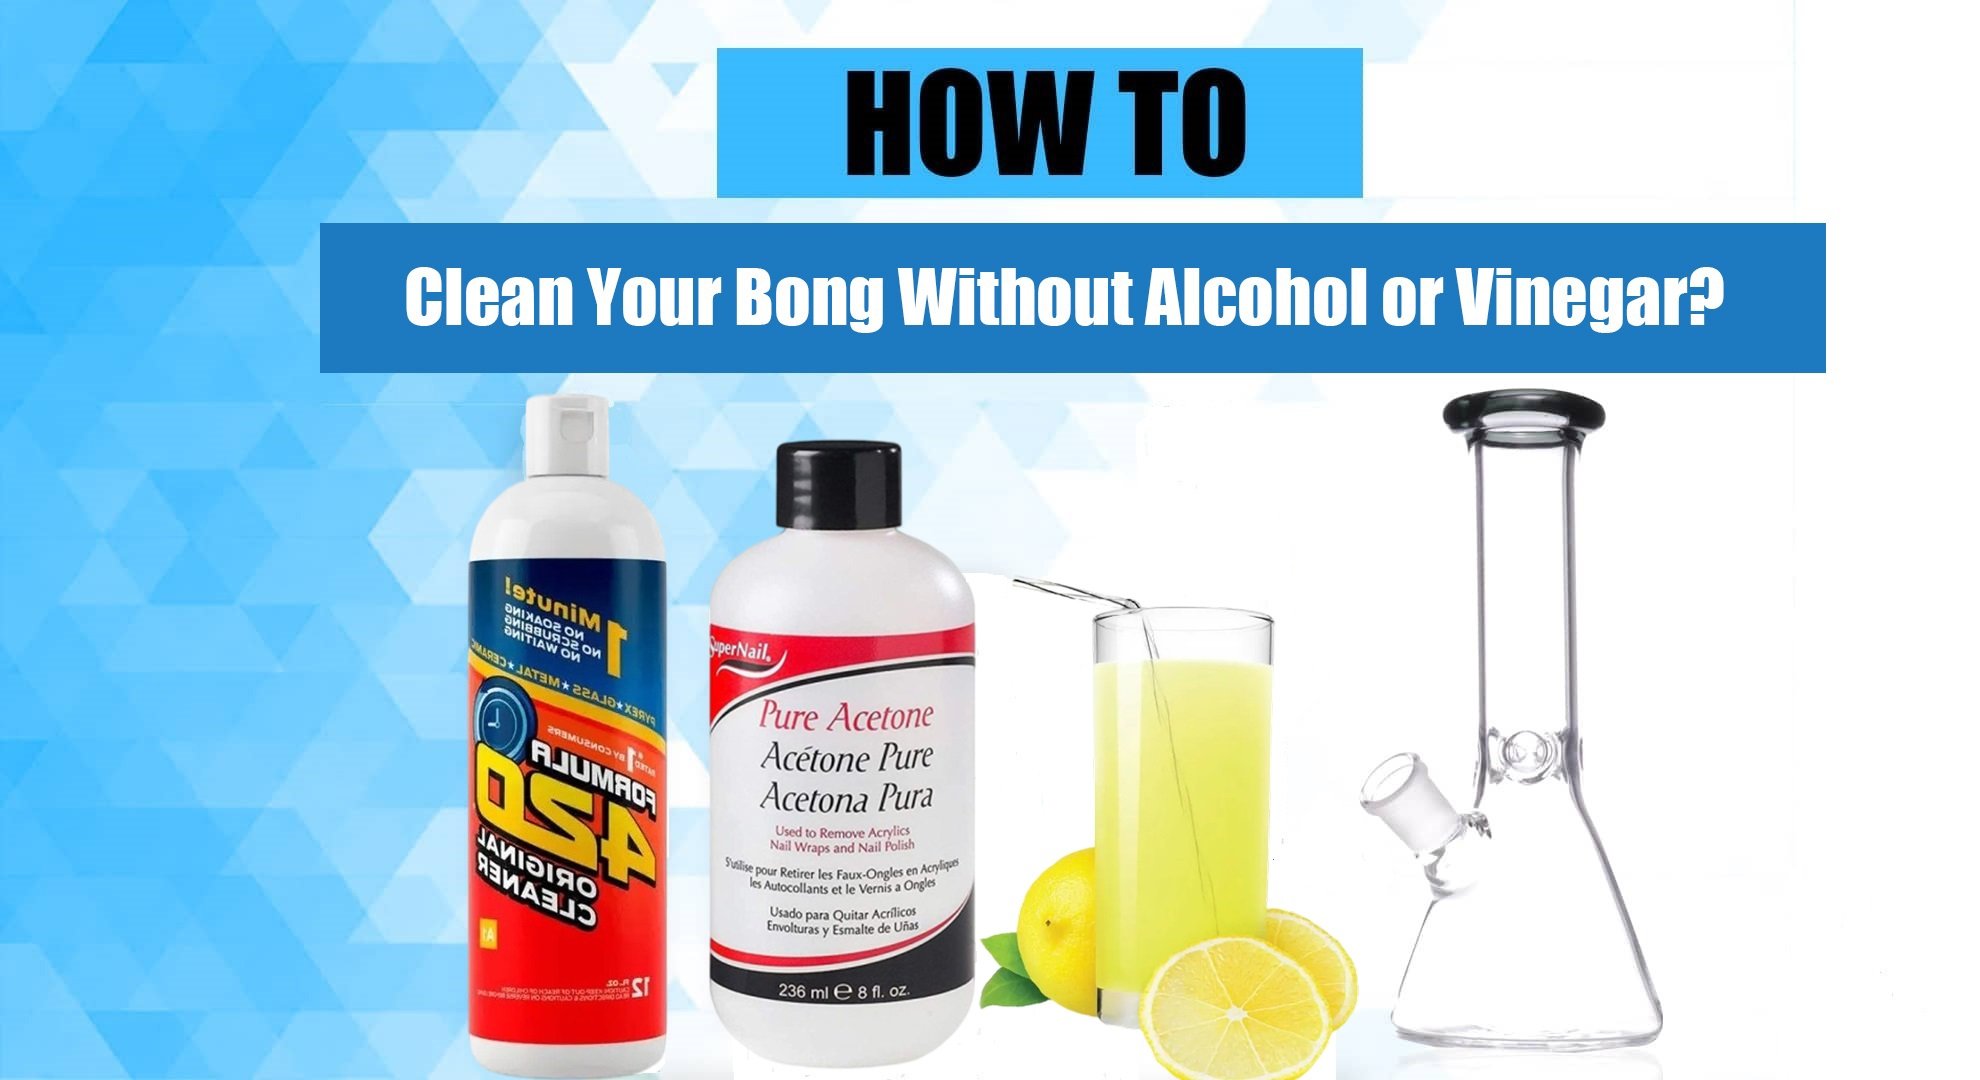 Clean Bong without Alcohol or Vinegar